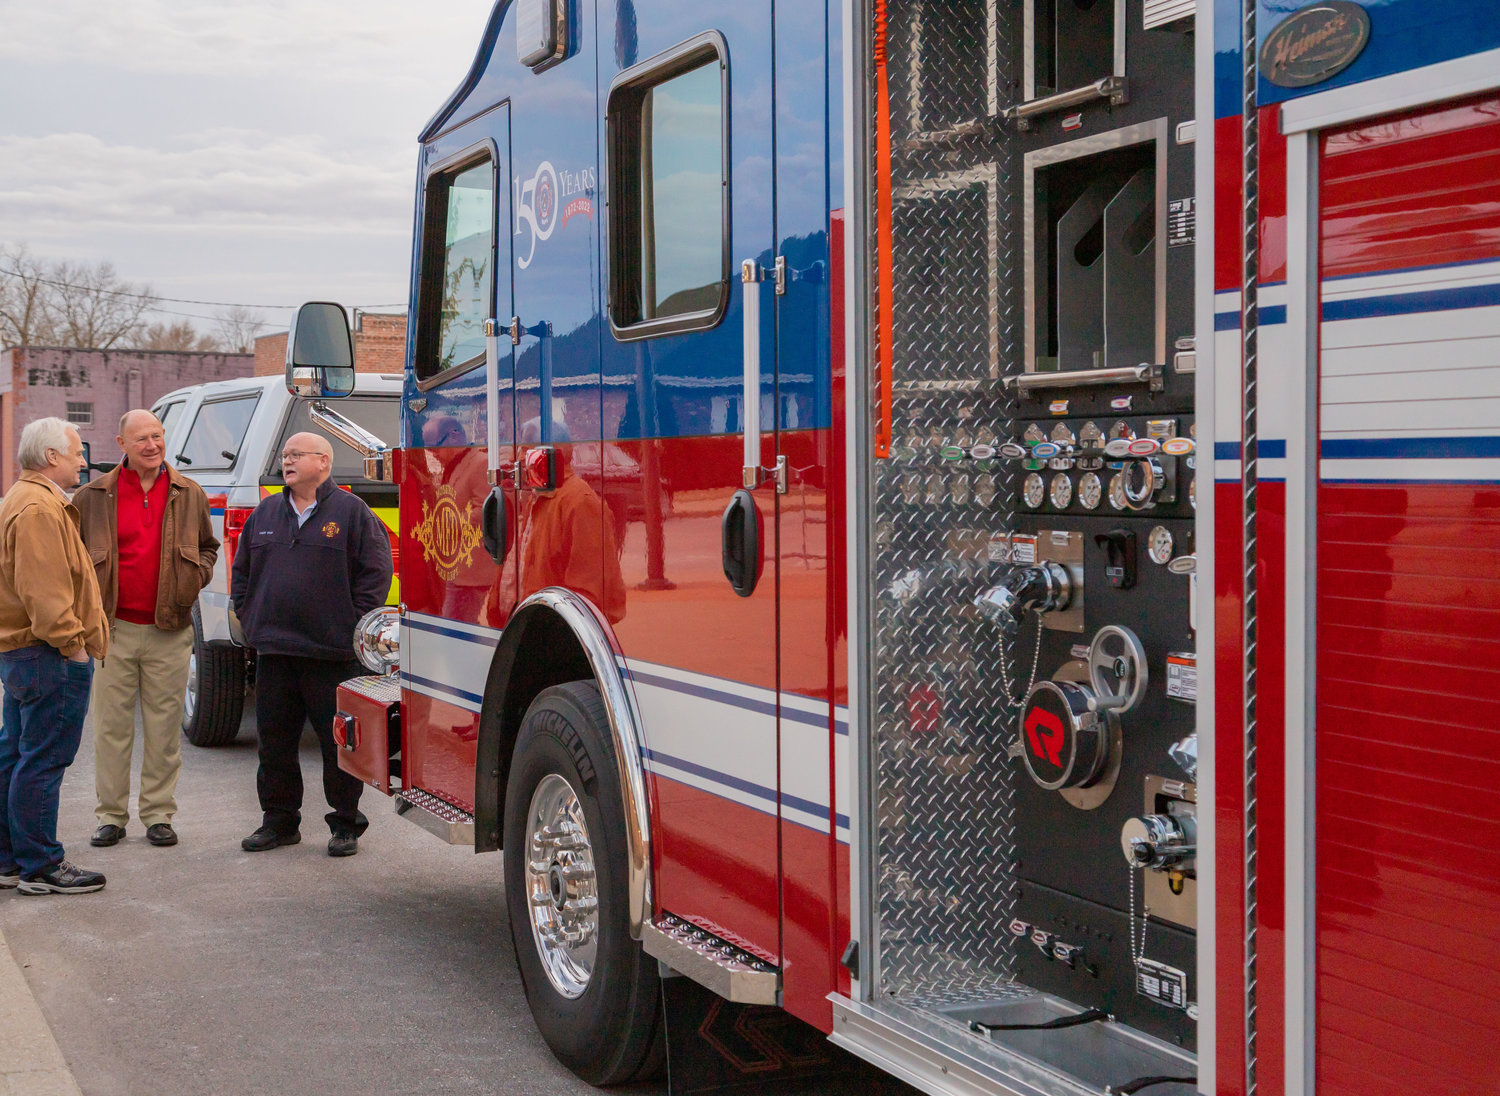 Moberly City Councilman John Kimmons, County Bank’s Kal Cleavinger and Moberly Fire Chief Don Ryan talk in front of the new Moberly fire truck before Tuesday’s city council meeting.